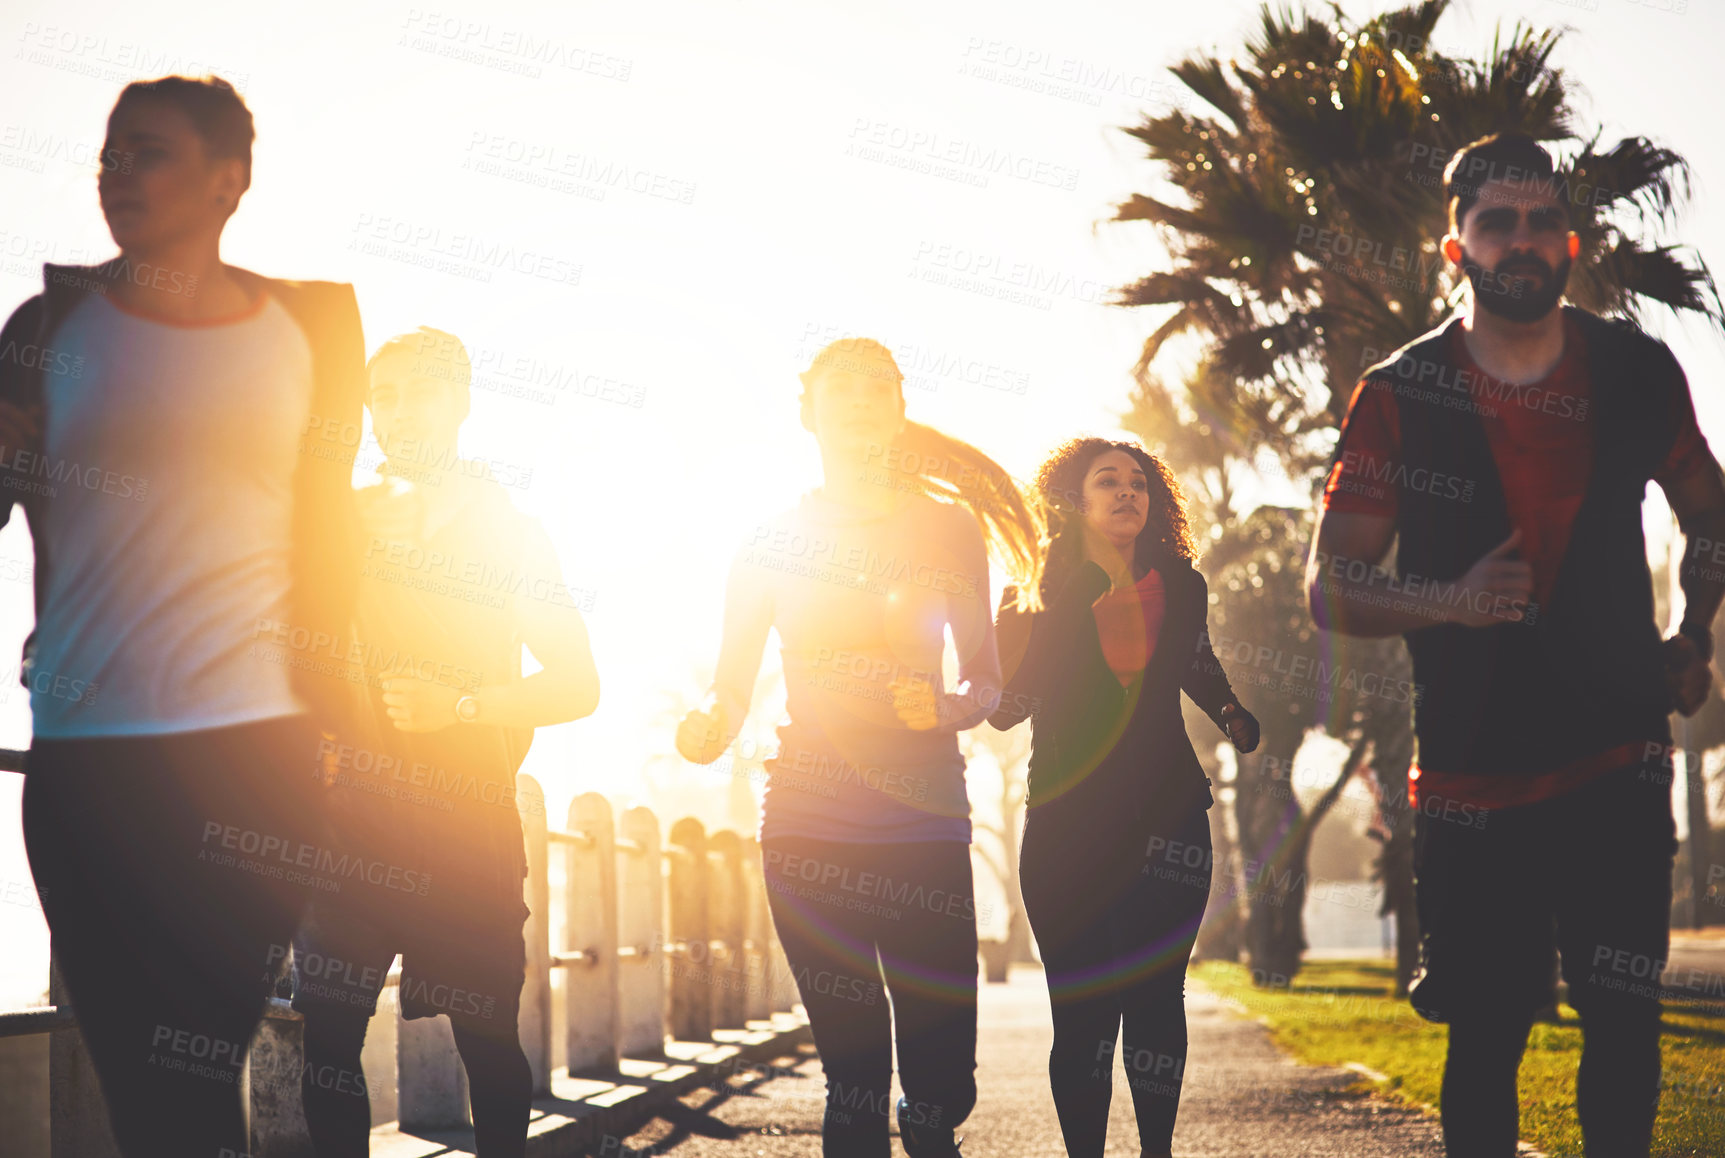 Buy stock photo Shot of a fitness group out running on the promenade